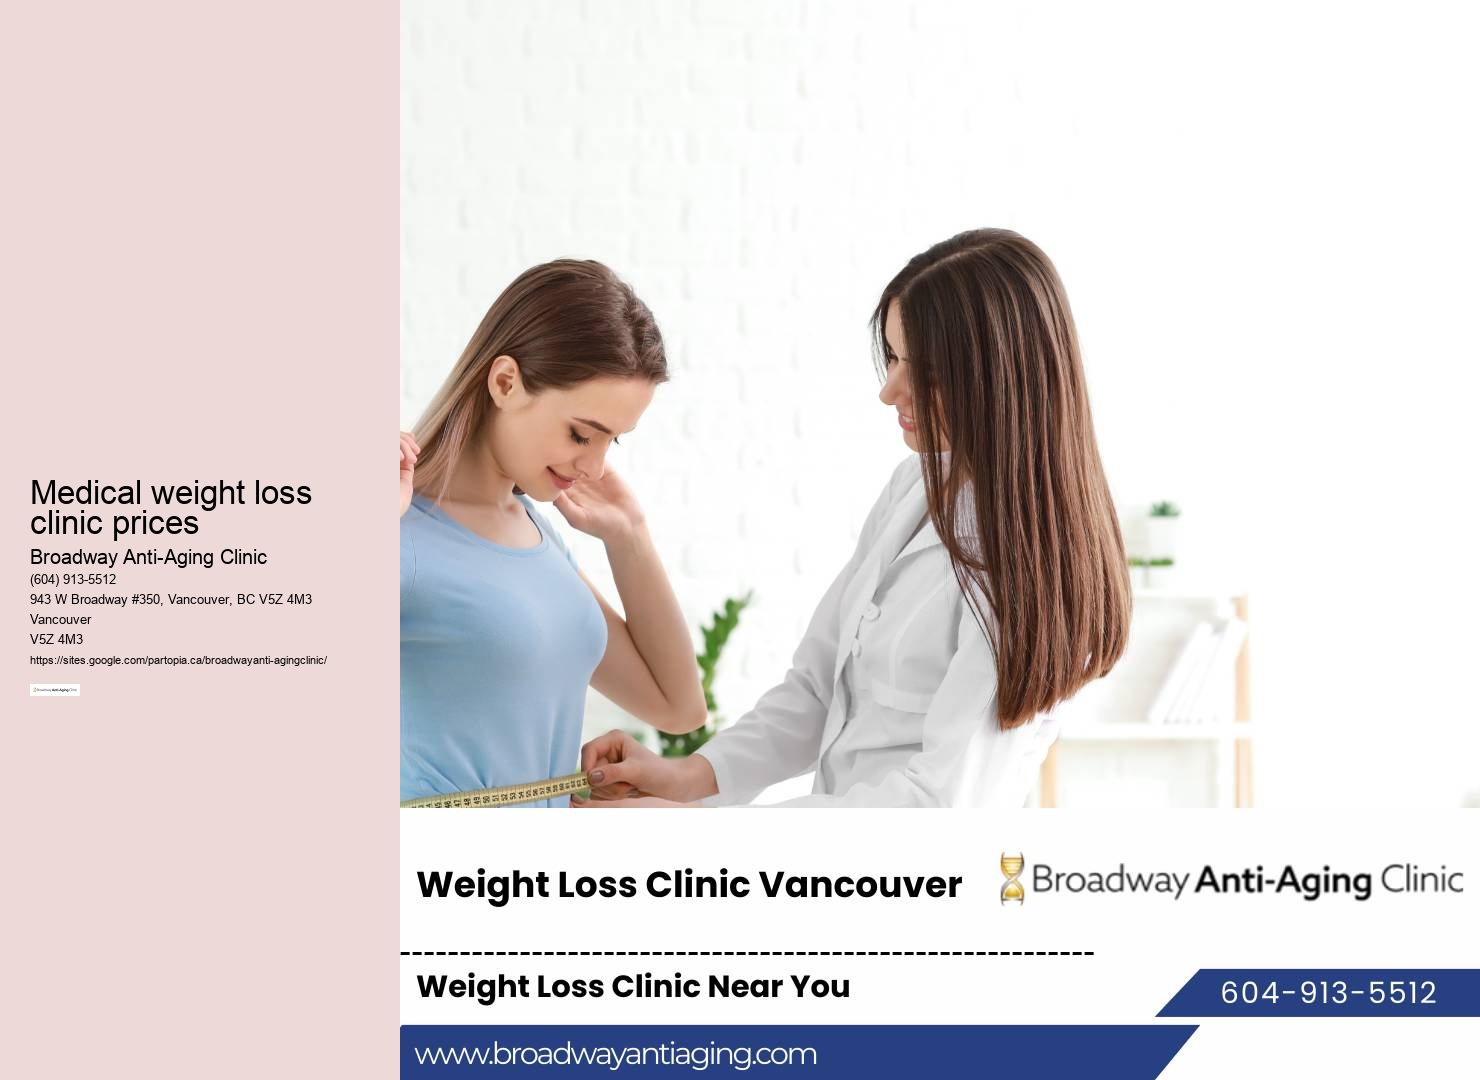 Medical weight loss clinic prices